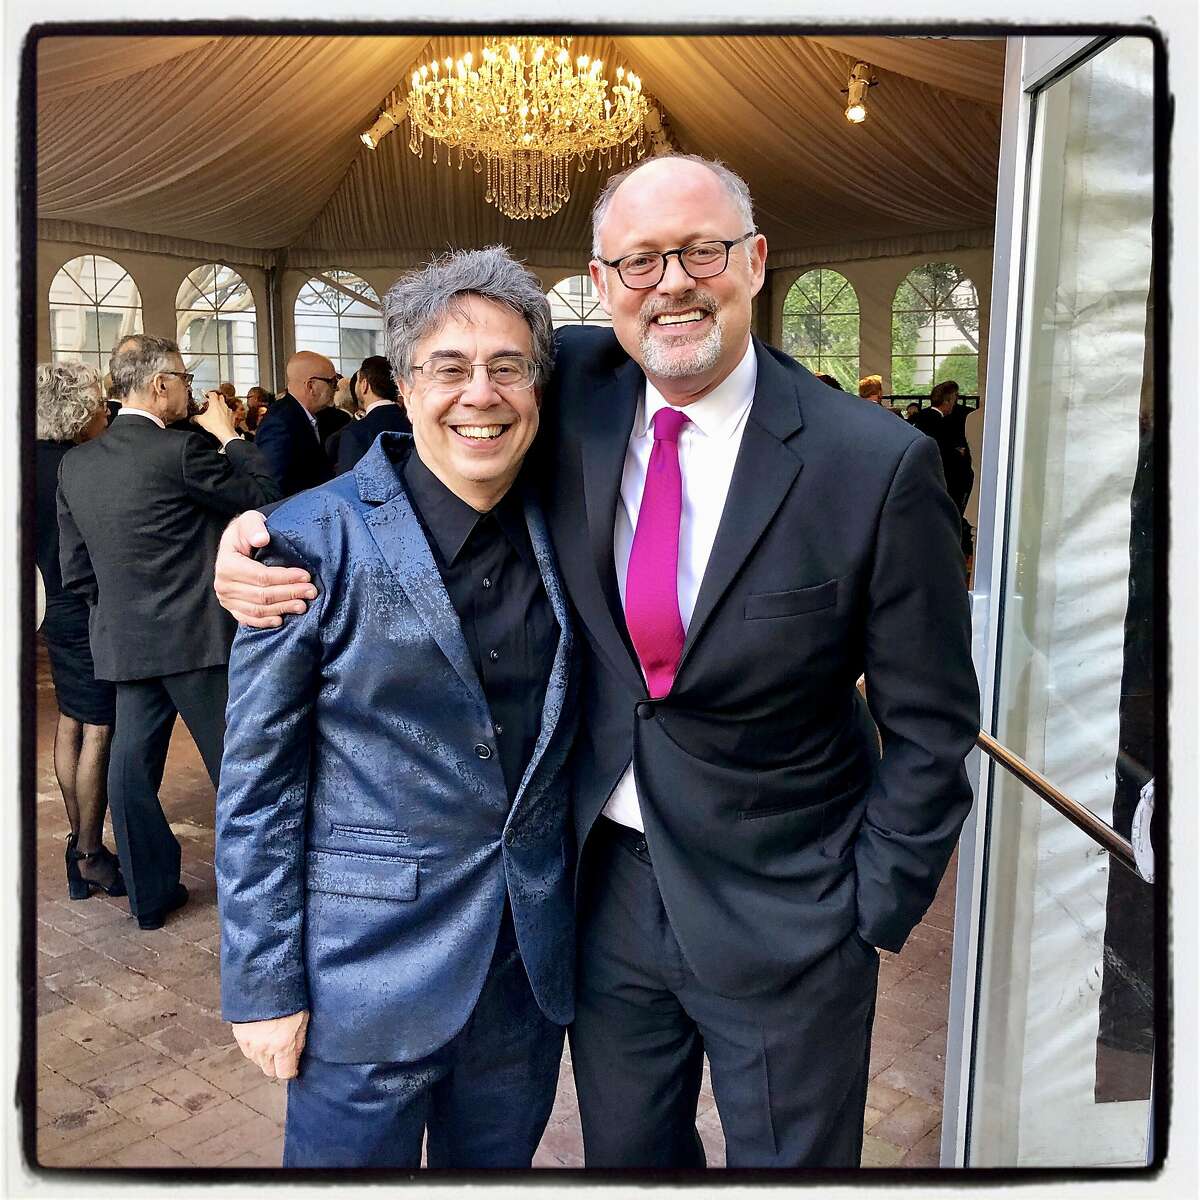 Berkeley Rep artistic director Tony Taccone (left) with Jonathan Moscone at the "Ovation" gala. June 7, 2019.